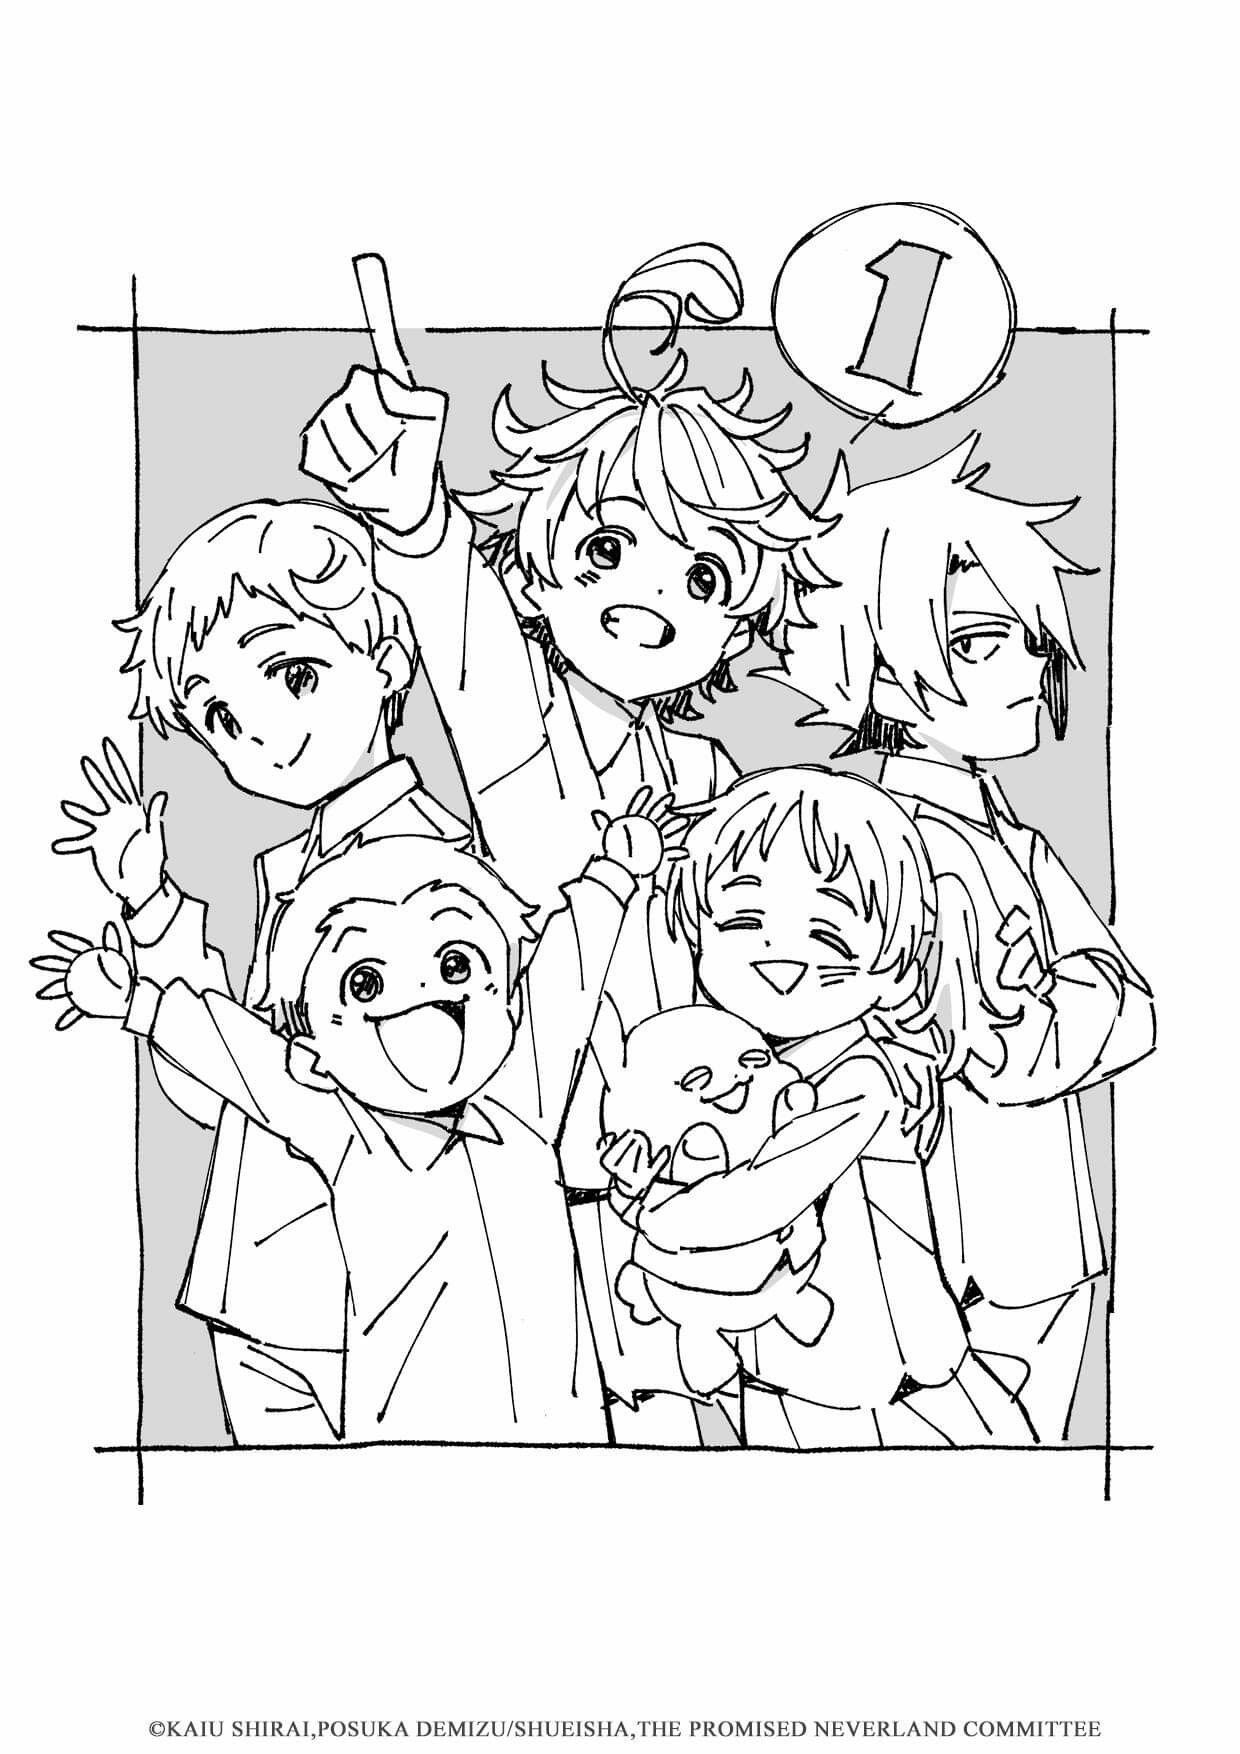 Pin by Pesui Capital on The Promised Neverland | Neverland, Neverland art,  Sketches